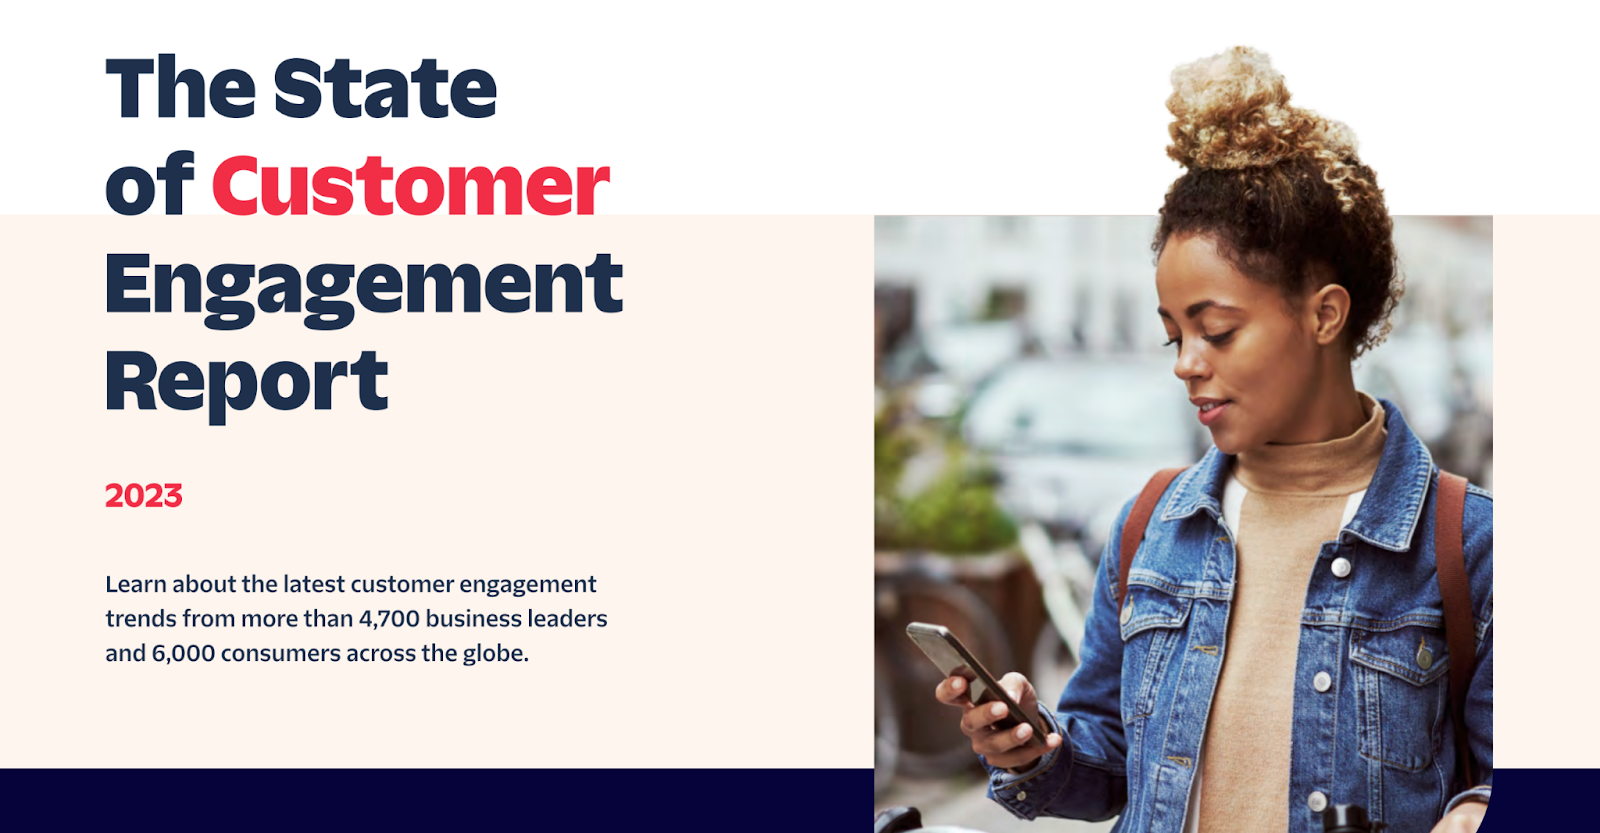 The State of Customer Engagement Report